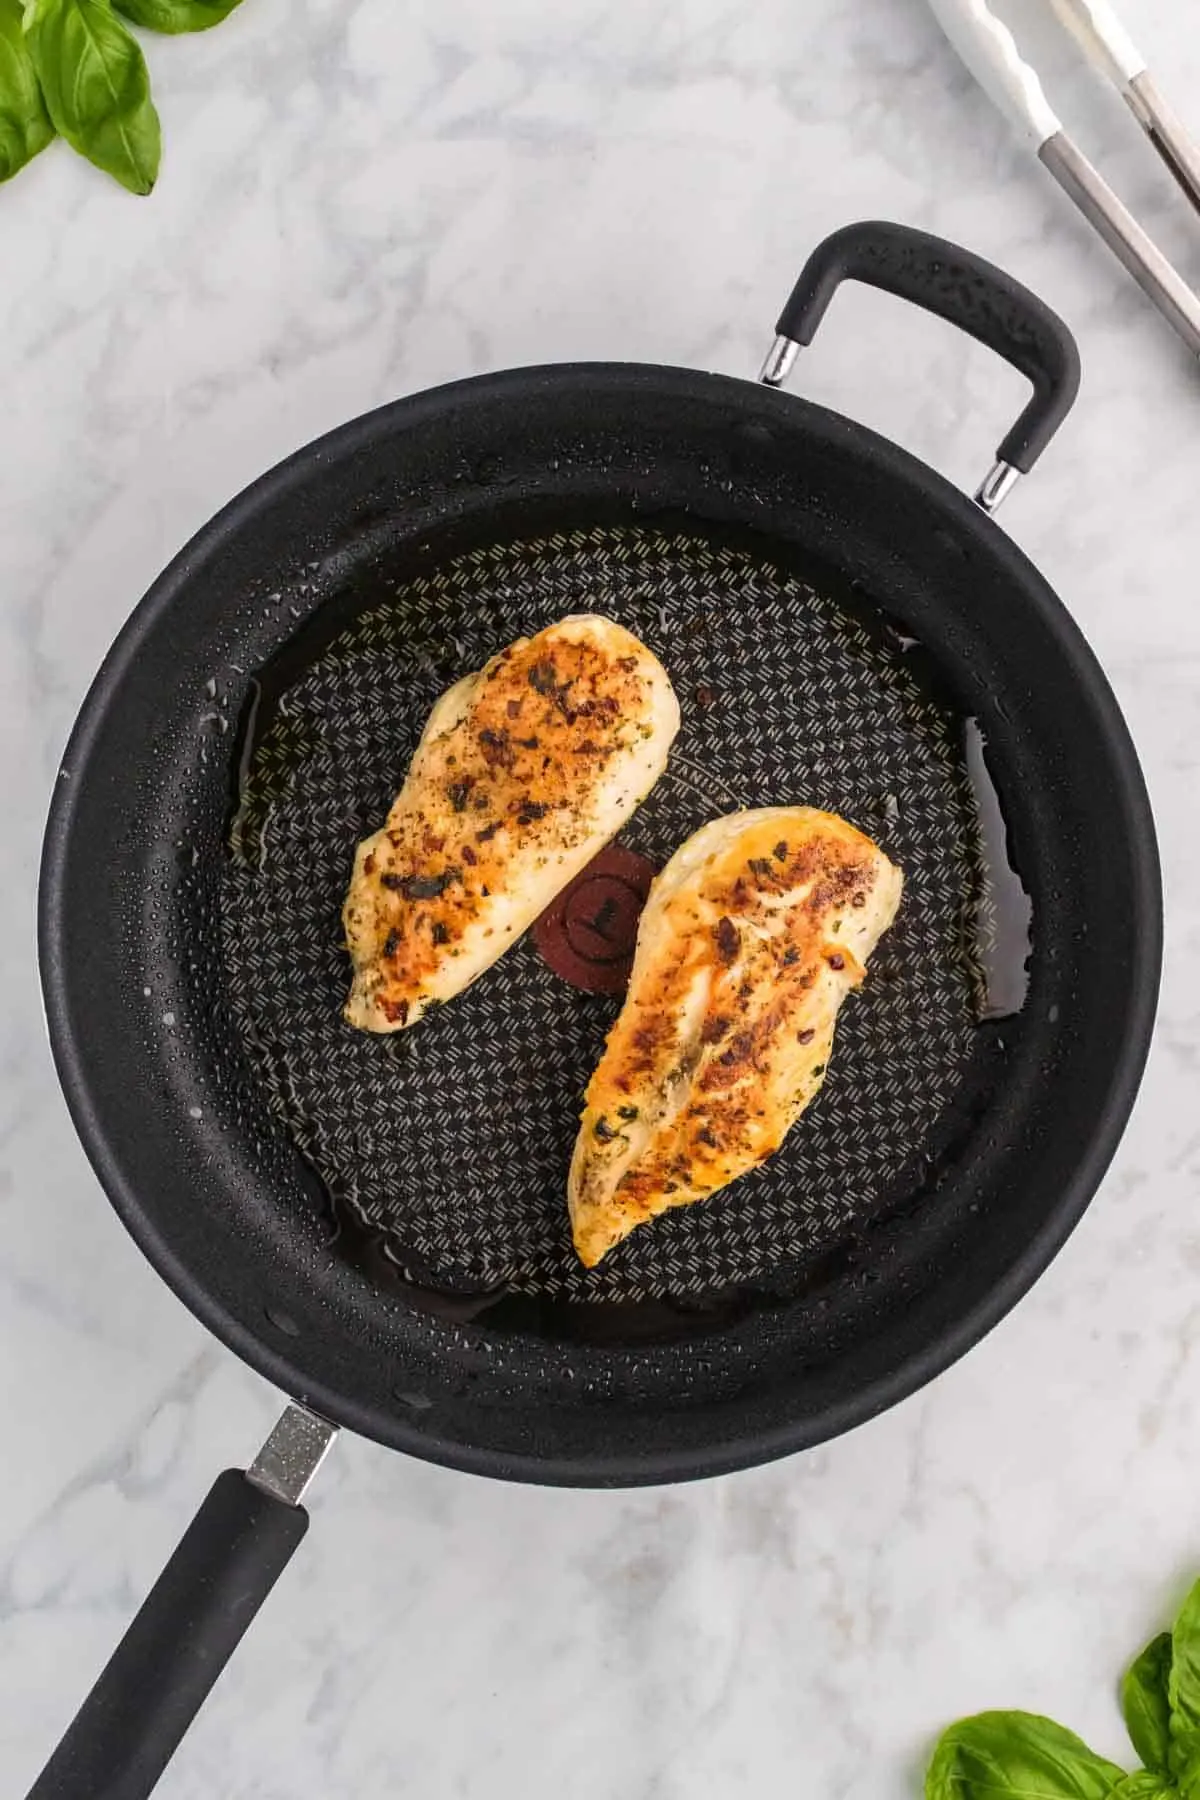 cooked, seasoned chicken breasts in a skillet